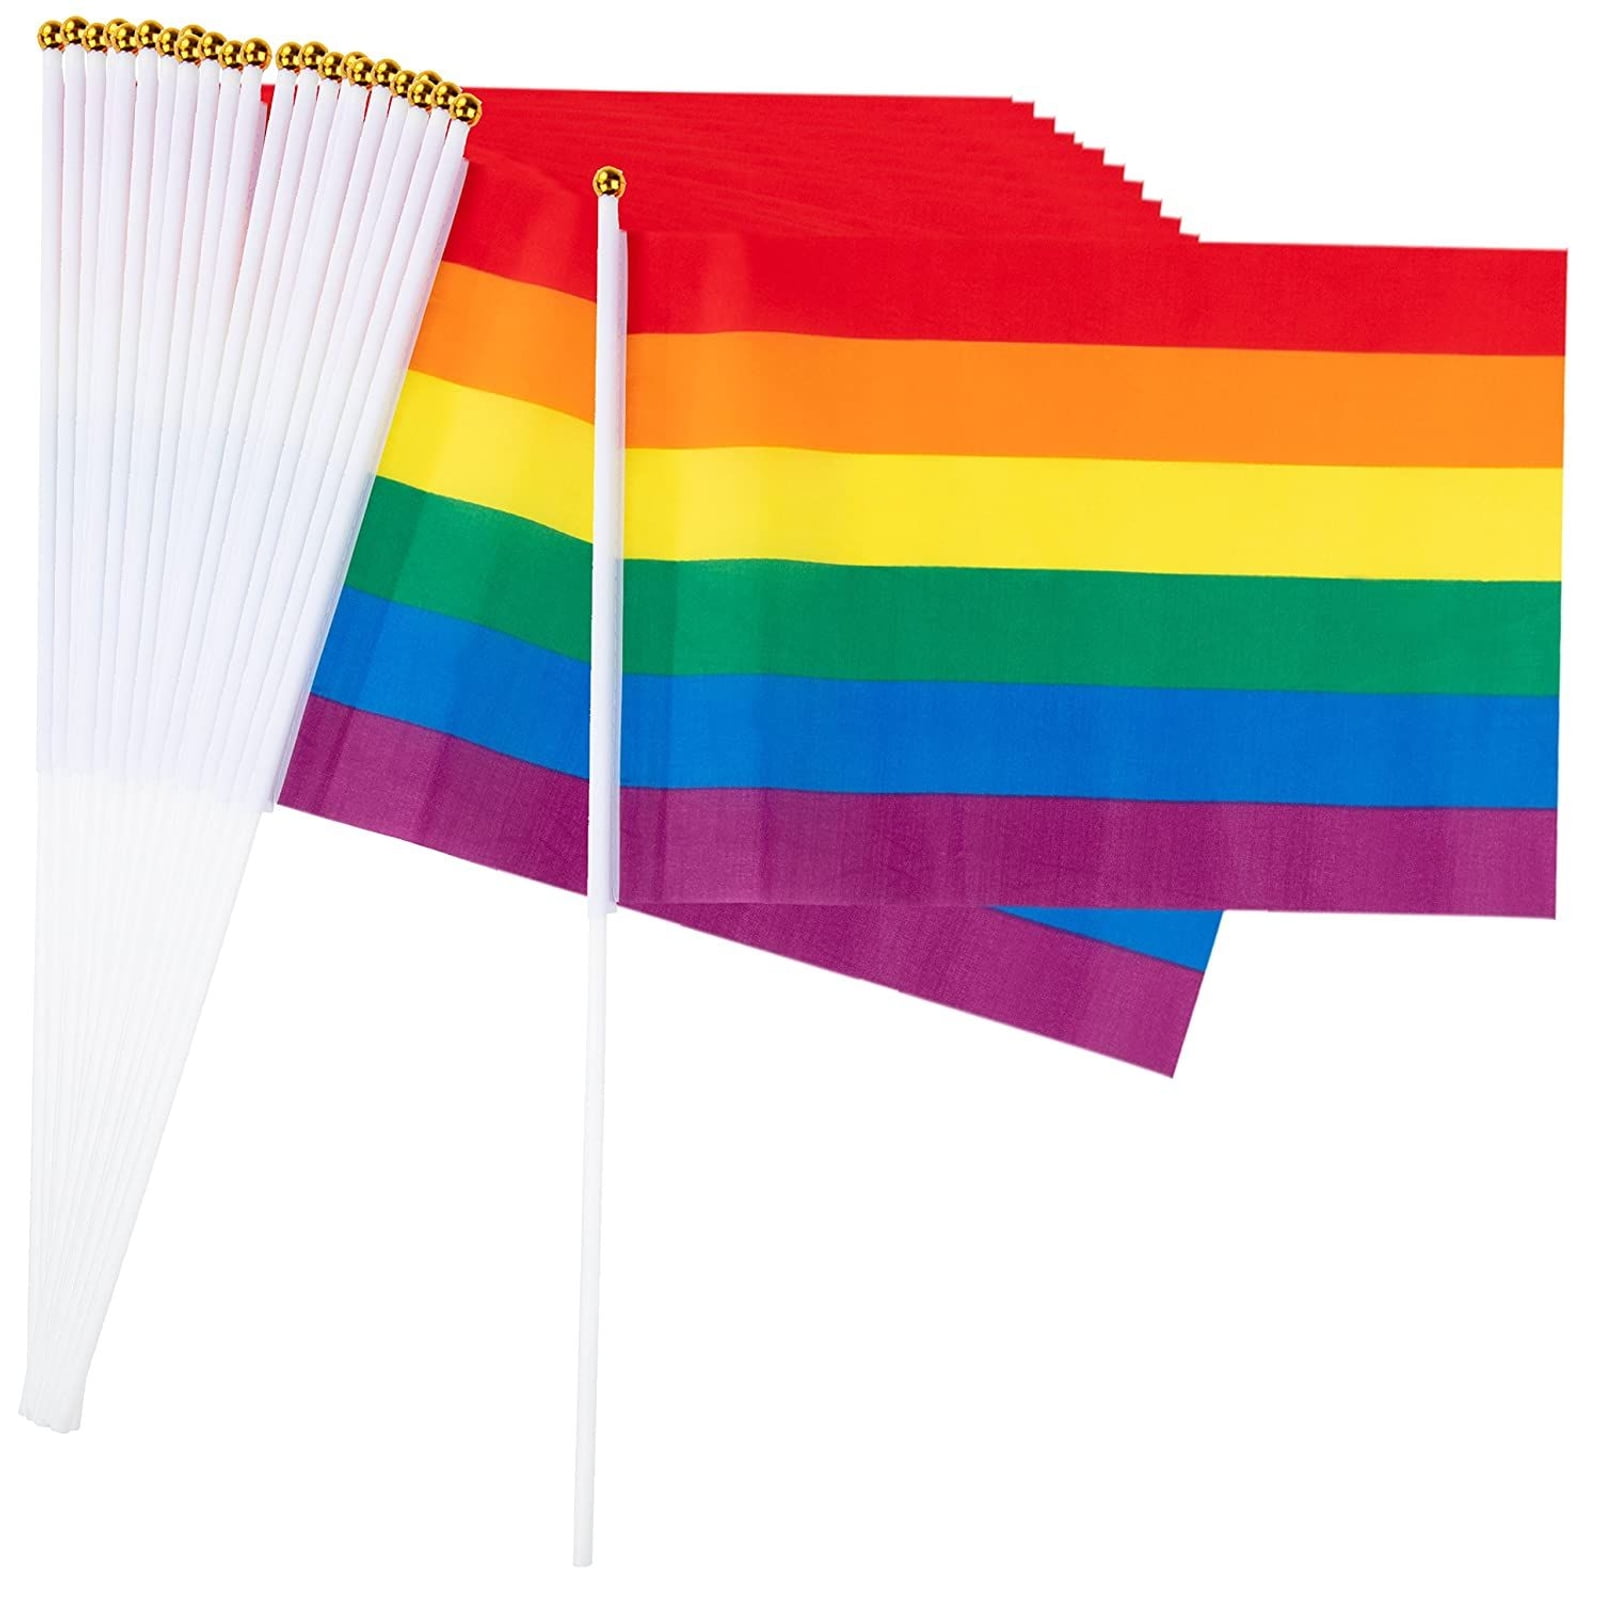 InnoFun 24 Pcs Pride Handheld Flags,Gay Bisexual Bi Pansexual Pan Transgender Trans Rainbow LGBT Hand Waving/Shaking Stick Flags with Flag Holders/Stand Bases for Parades,Decorations,Celebrations 